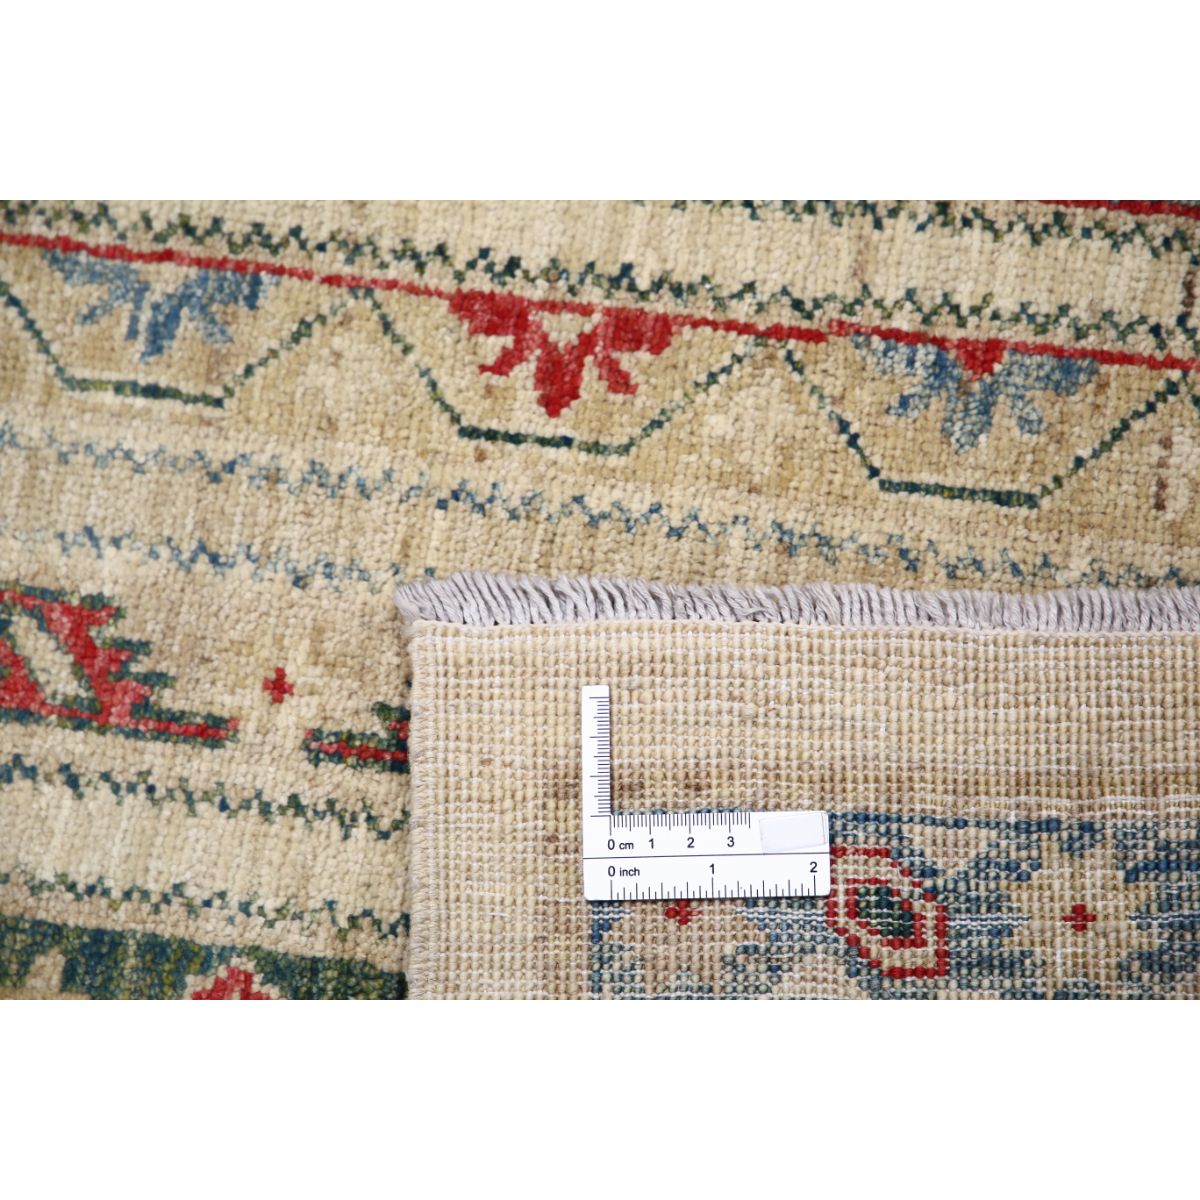 Shaal 6'8" X 9'2" Wool Hand-Knotted Rug